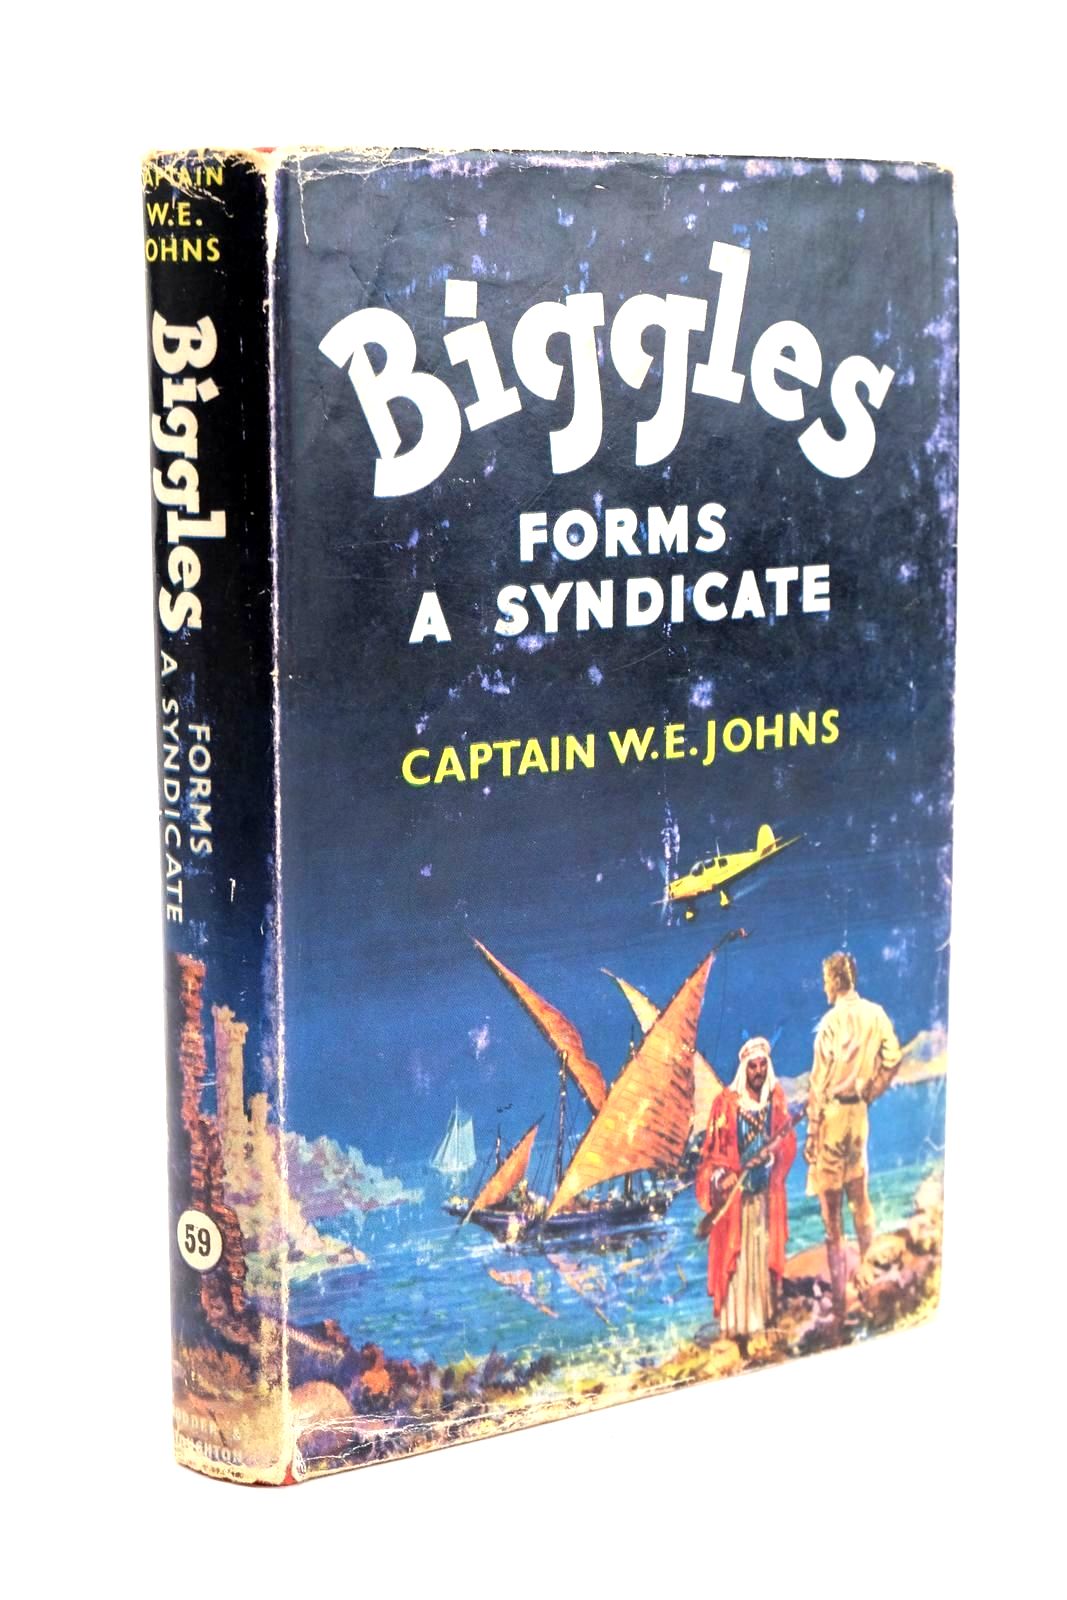 Photo of BIGGLES FORMS A SYNDICATE written by Johns, W.E. illustrated by Stead,  published by Hodder &amp; Stoughton (STOCK CODE: 1324362)  for sale by Stella & Rose's Books